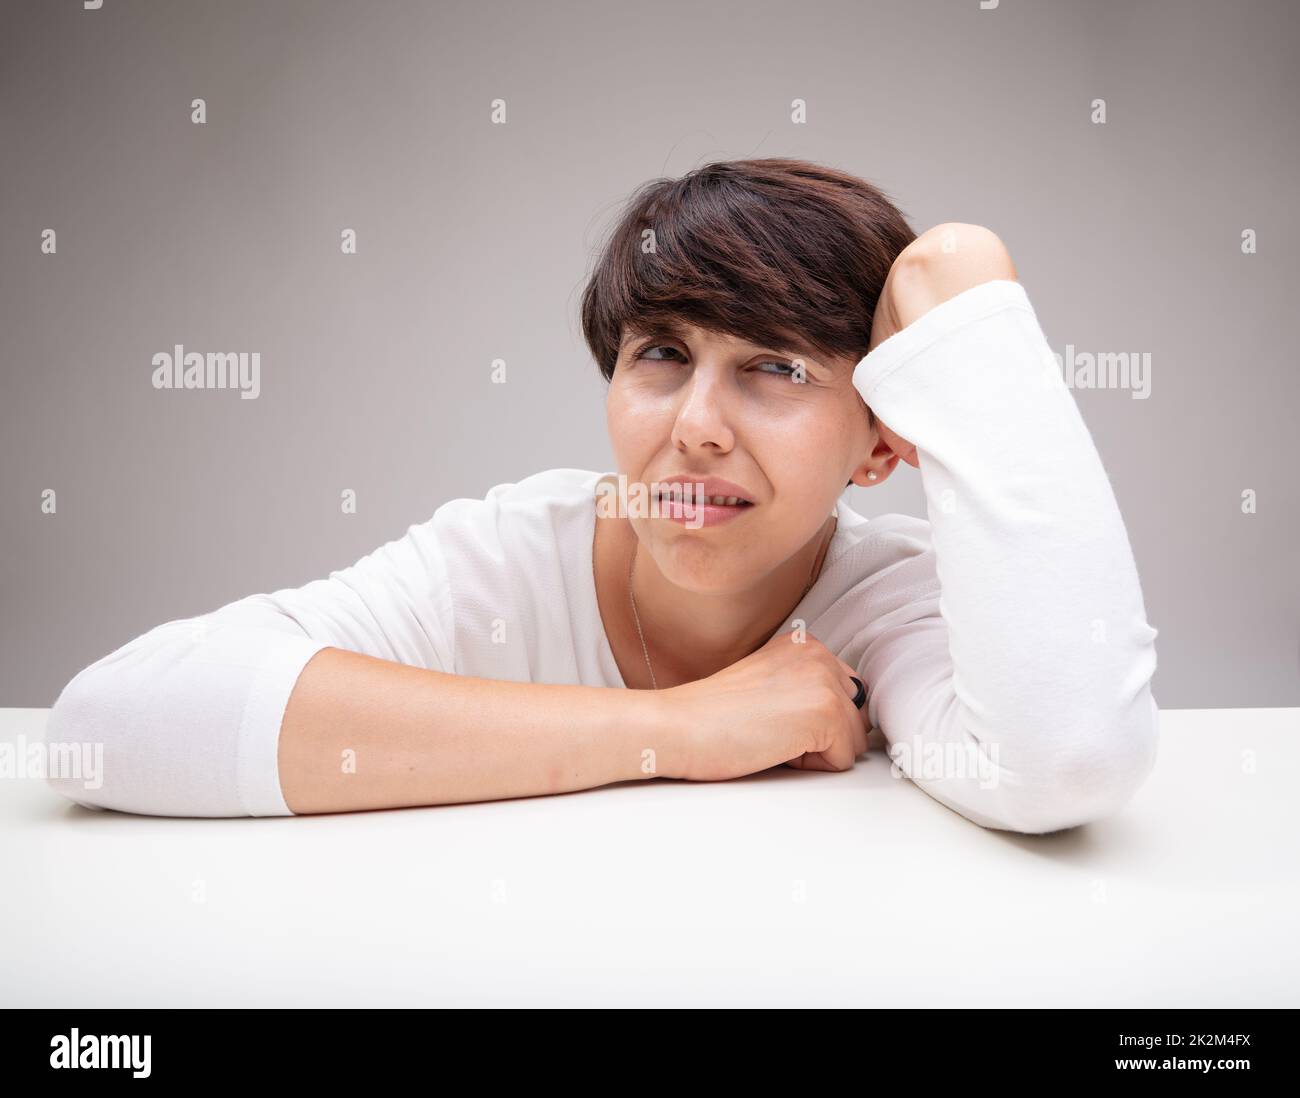 Puzzled or anxious woman deep in thought Stock Photo